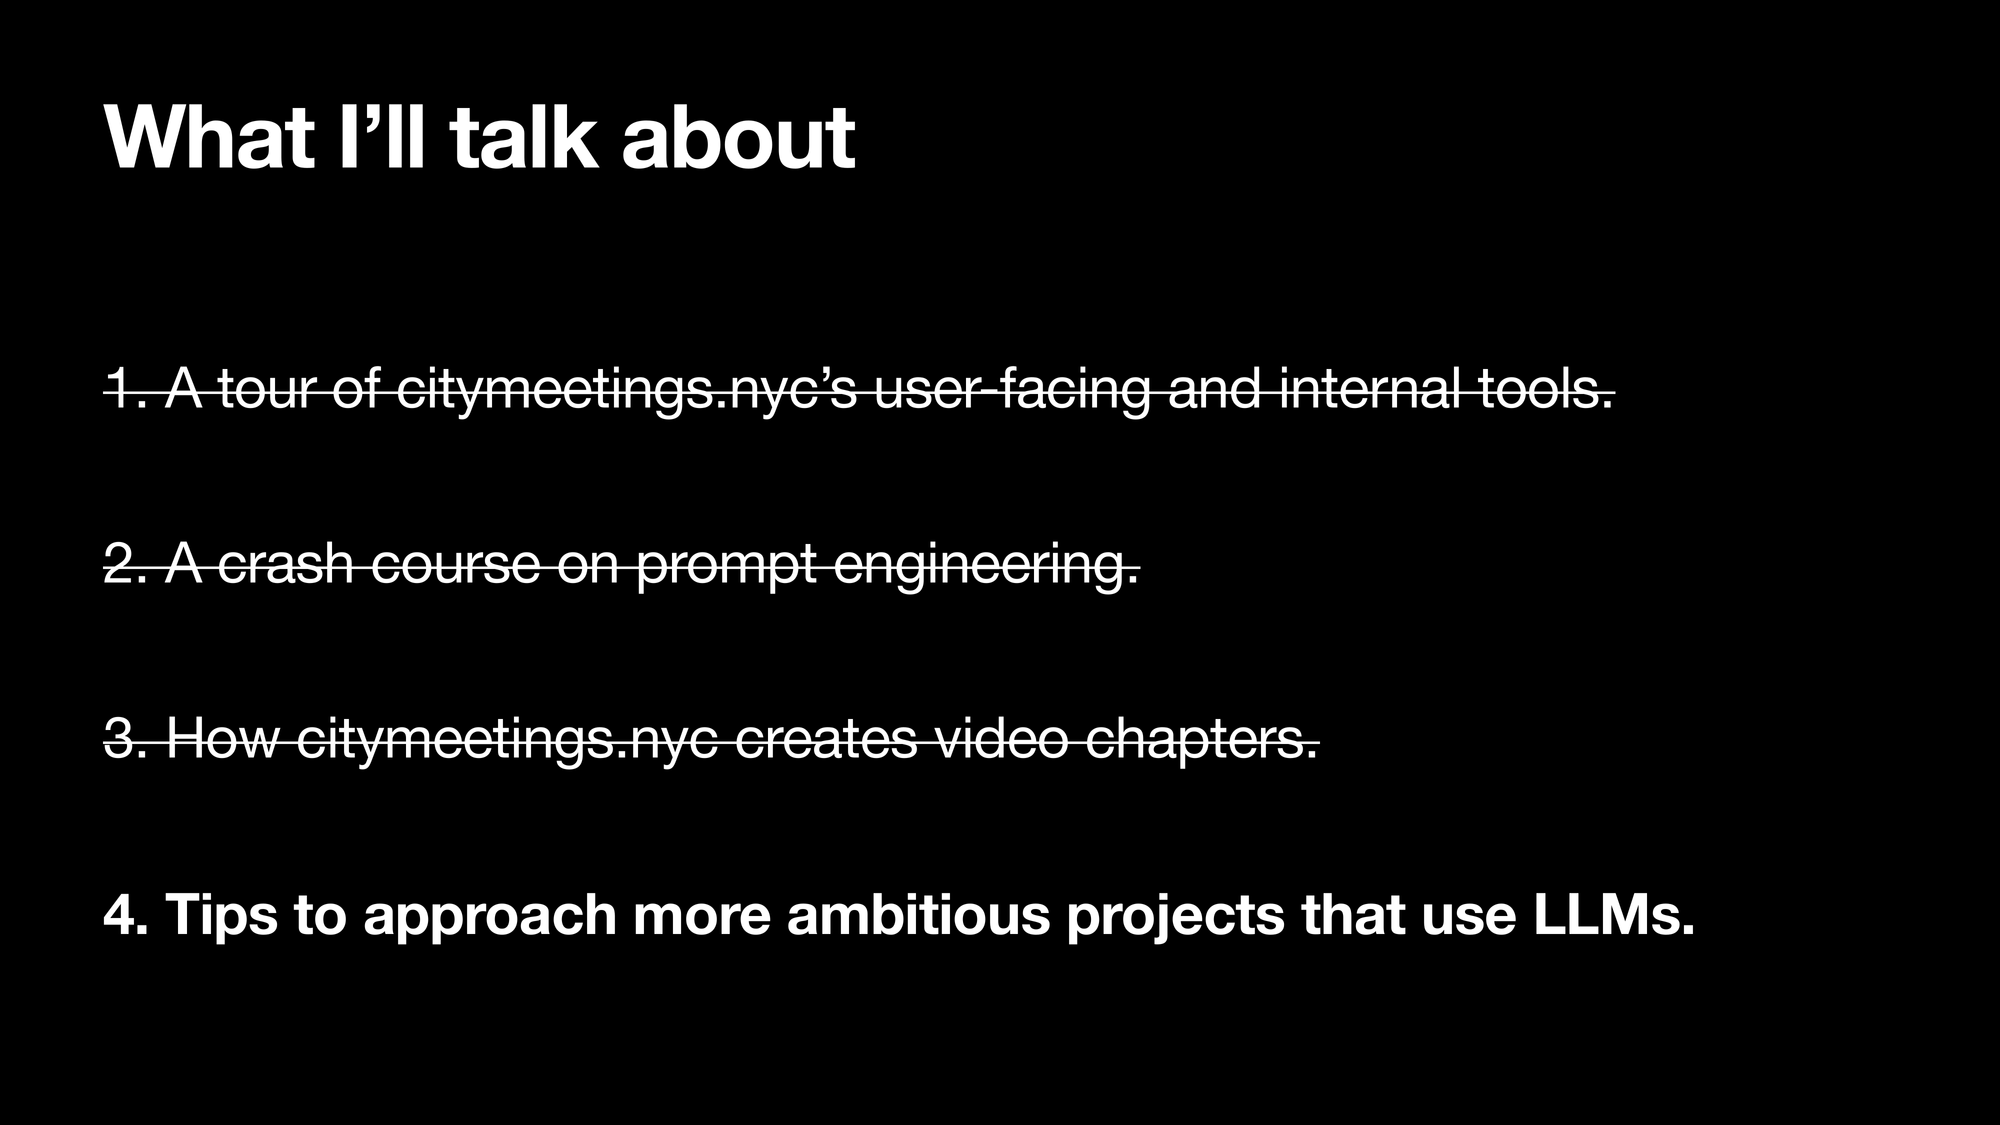 What I’ll talk about. 1. A tour of citymeetings.nycs user-facing and internal tools. 2. A crash course on writing an effective prompt. 3. How citymeetings.nyc creates video chapters. 4. Tips to approach more ambitious projects that use LLMSs. Sections 1, 2, and 3 are striked-out, section 4 is highlighted.
